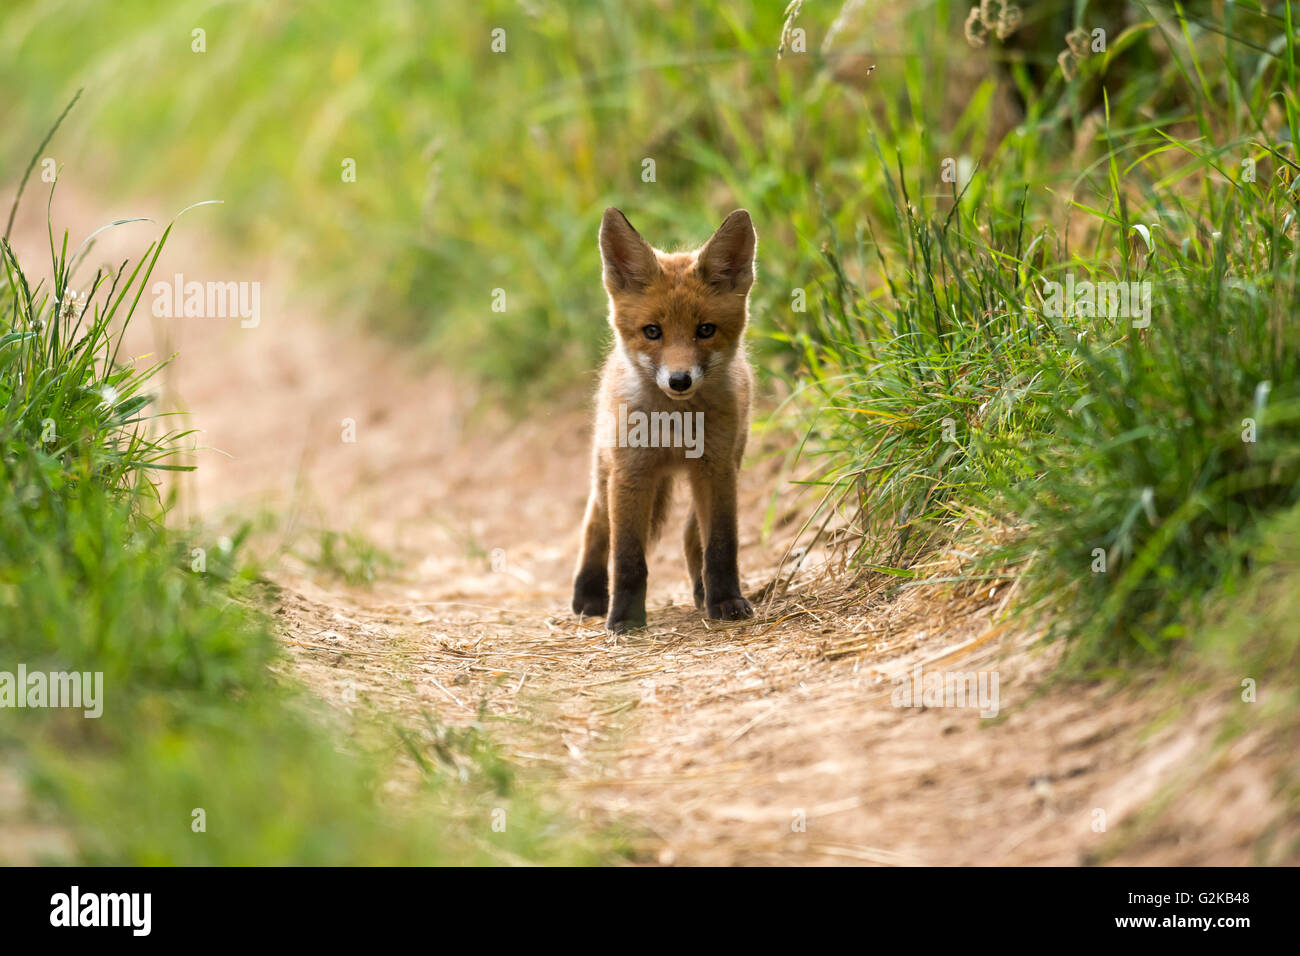 Young red fox (Vulpes vulpes) standing on path, Young Animal, Puppy, Baden-Württemberg, Germany Stock Photo